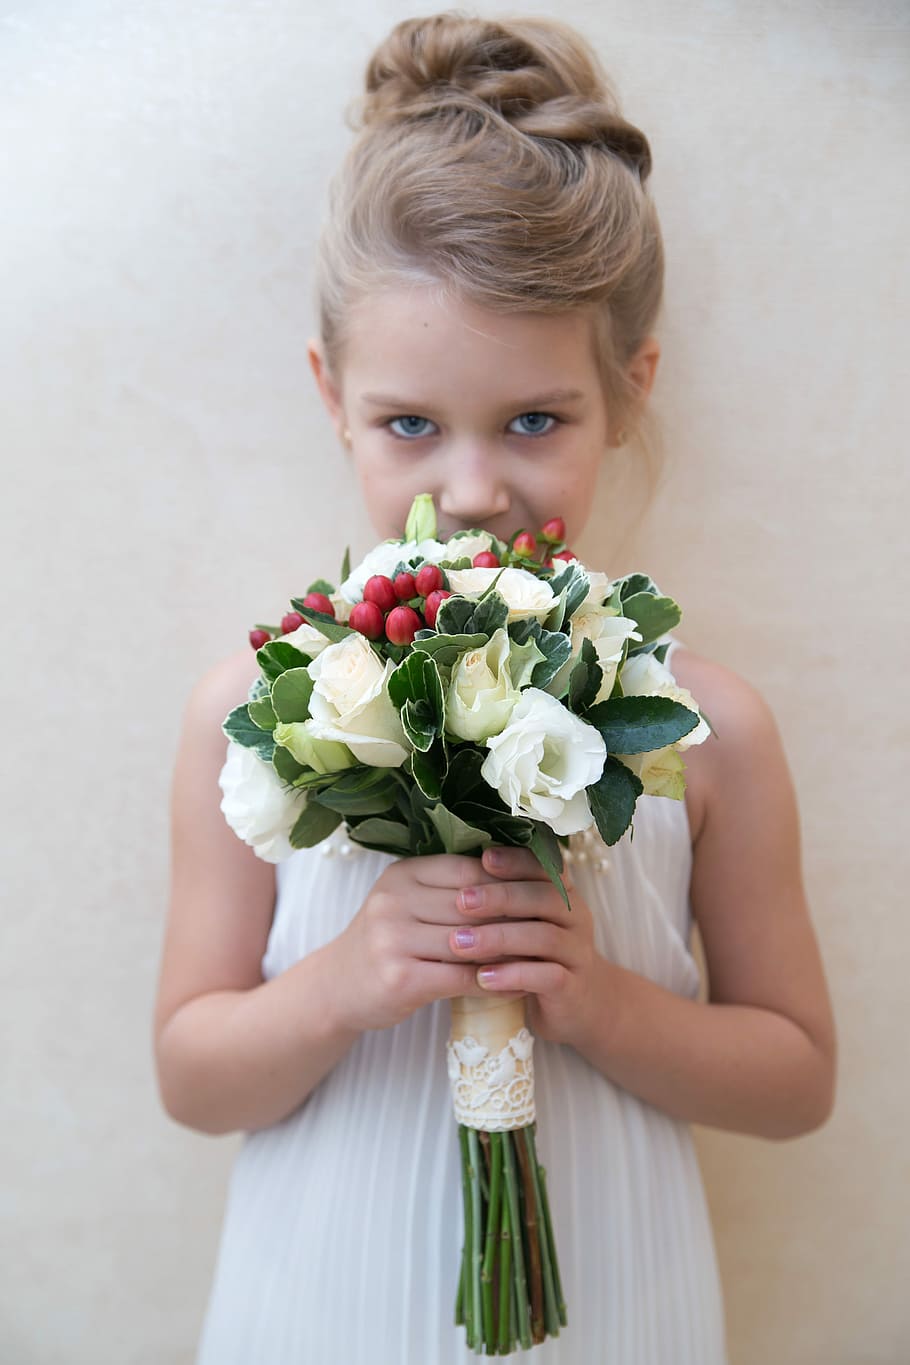 girl holding white rose bouquet, flowers, baby, small, flowering plant